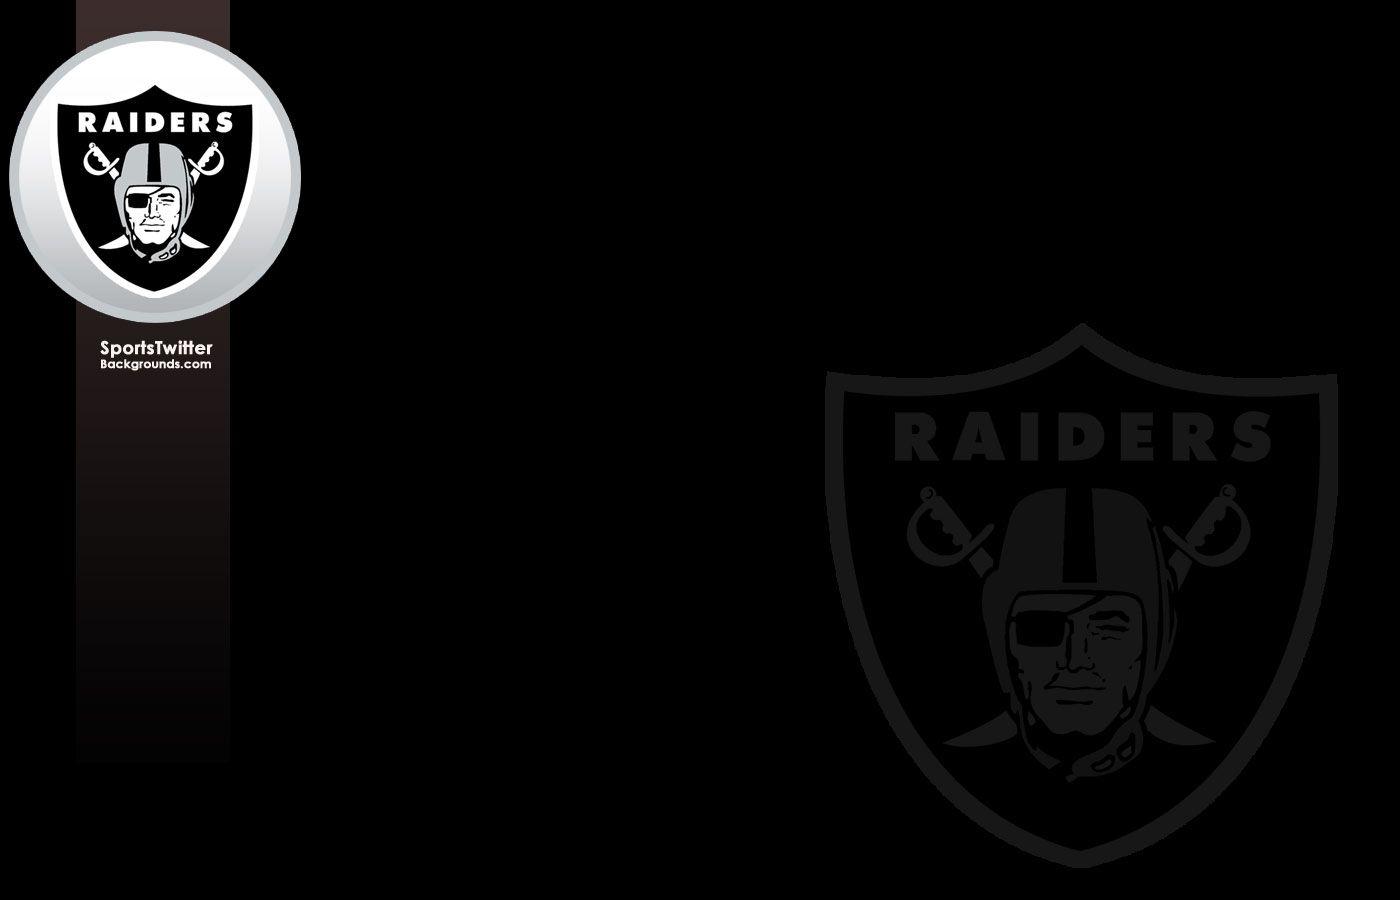 Hope you like this oakland raiders wallpaper background in high